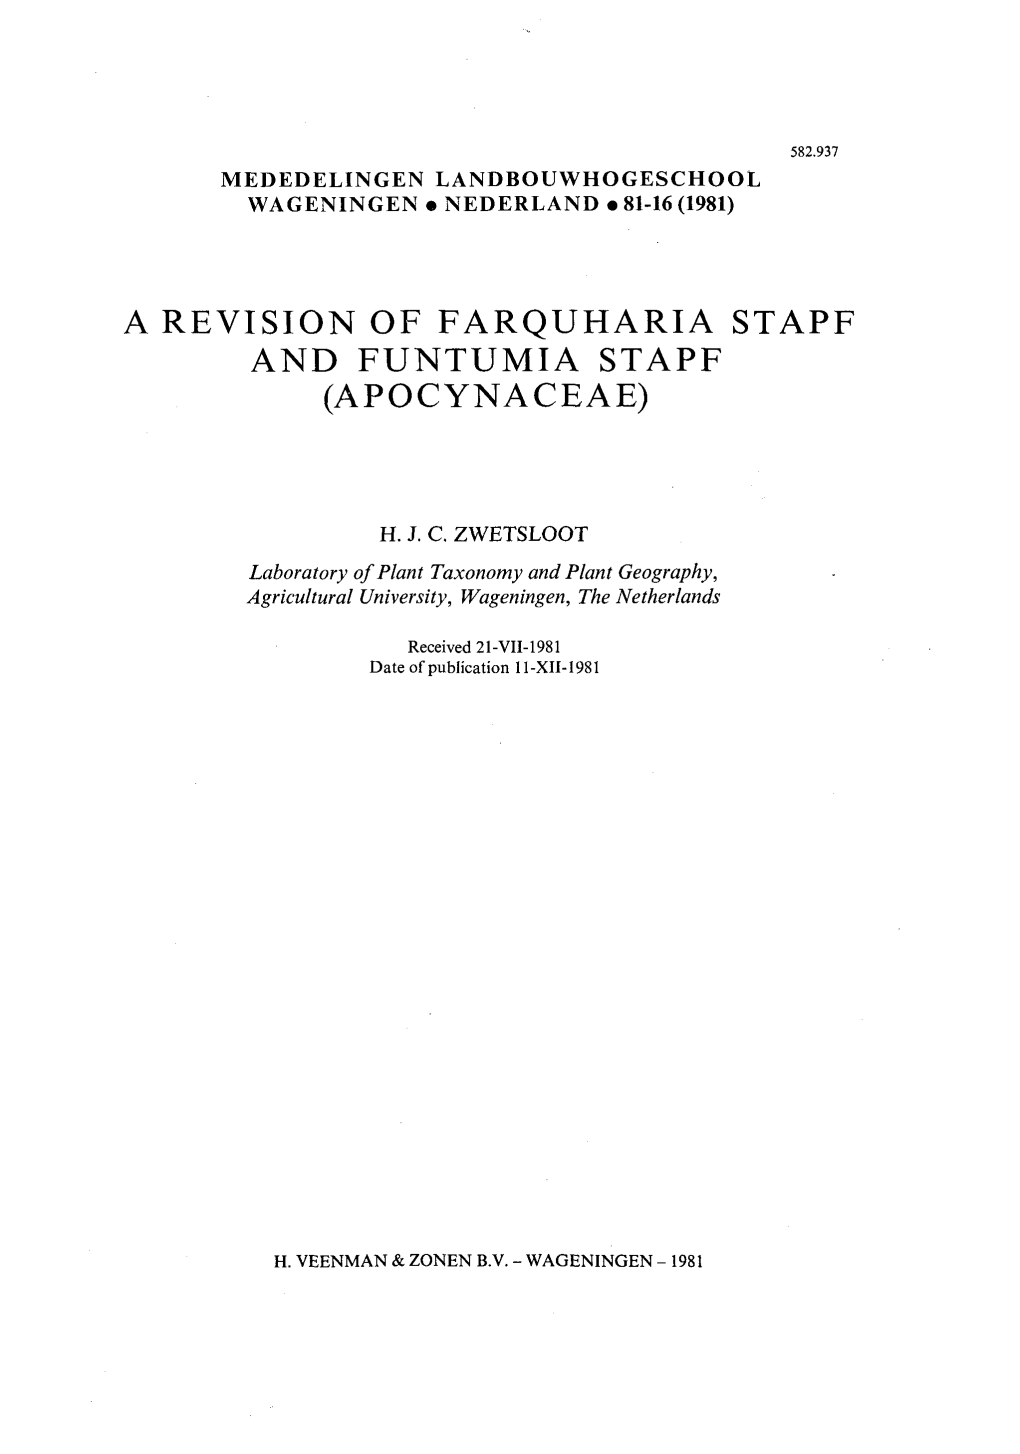 A Revision of Farquharia Stapf and Funtumia Stapf (Apocynaceae)